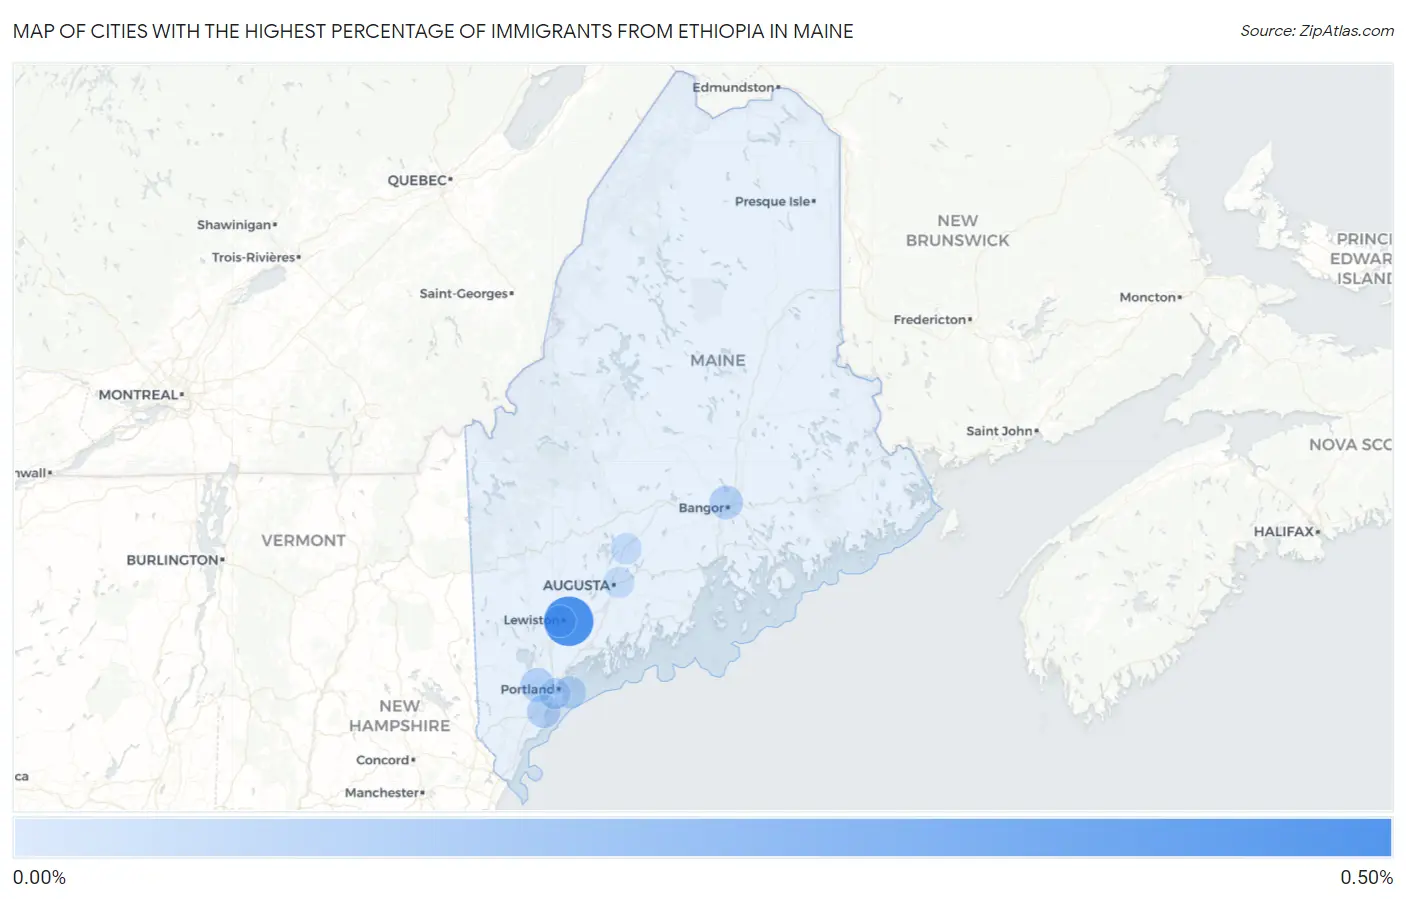 Cities with the Highest Percentage of Immigrants from Ethiopia in Maine Map